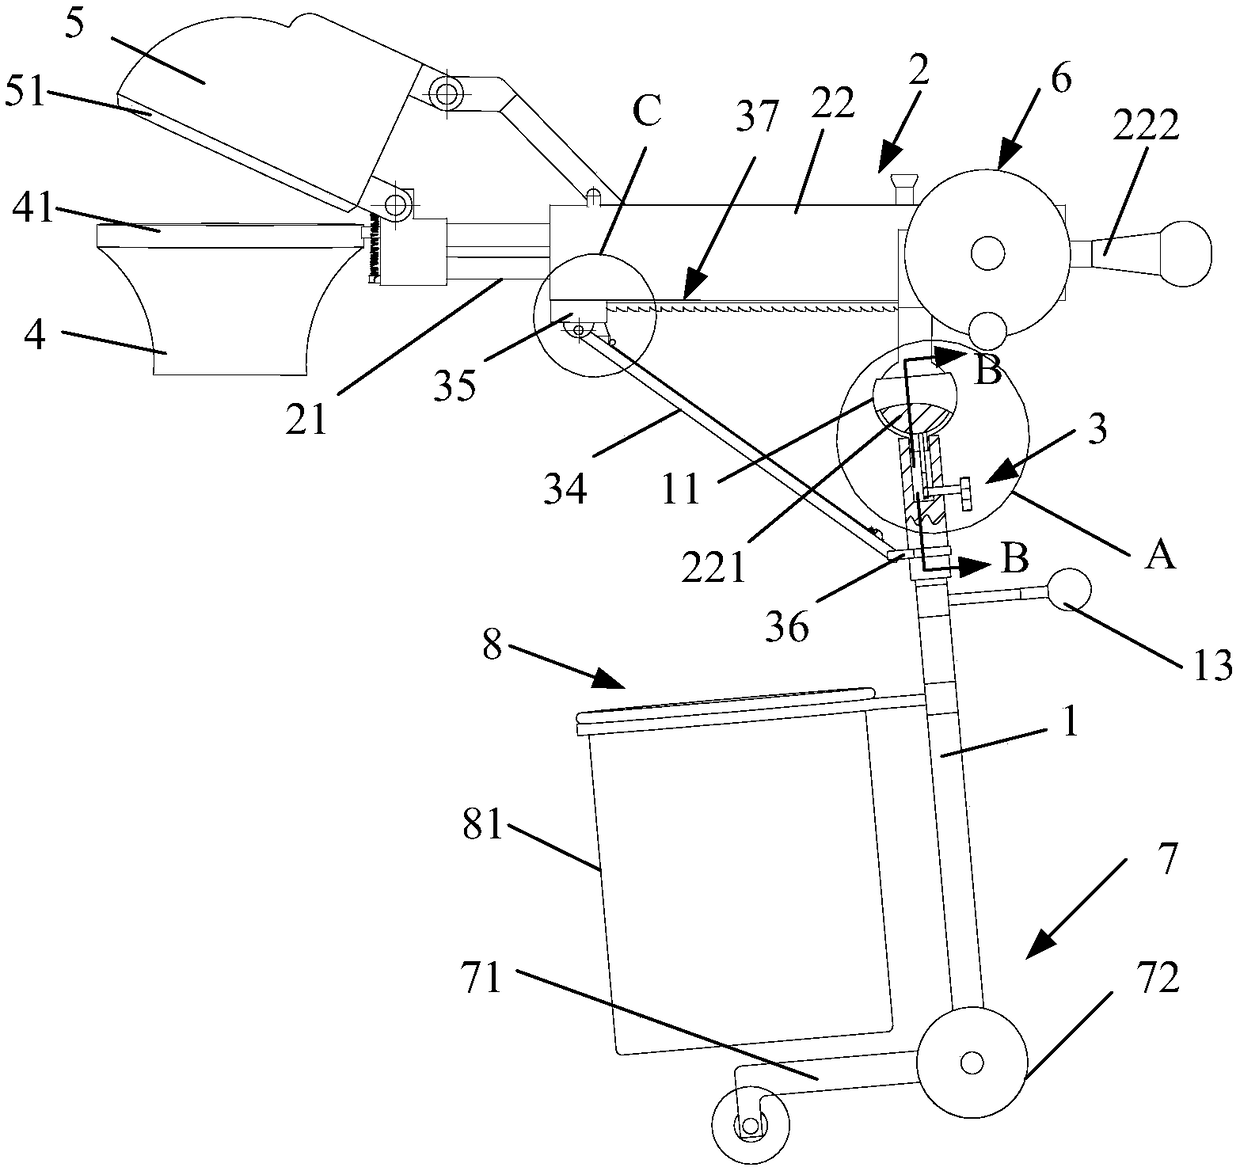 Device for assisting in manual picking of fruits